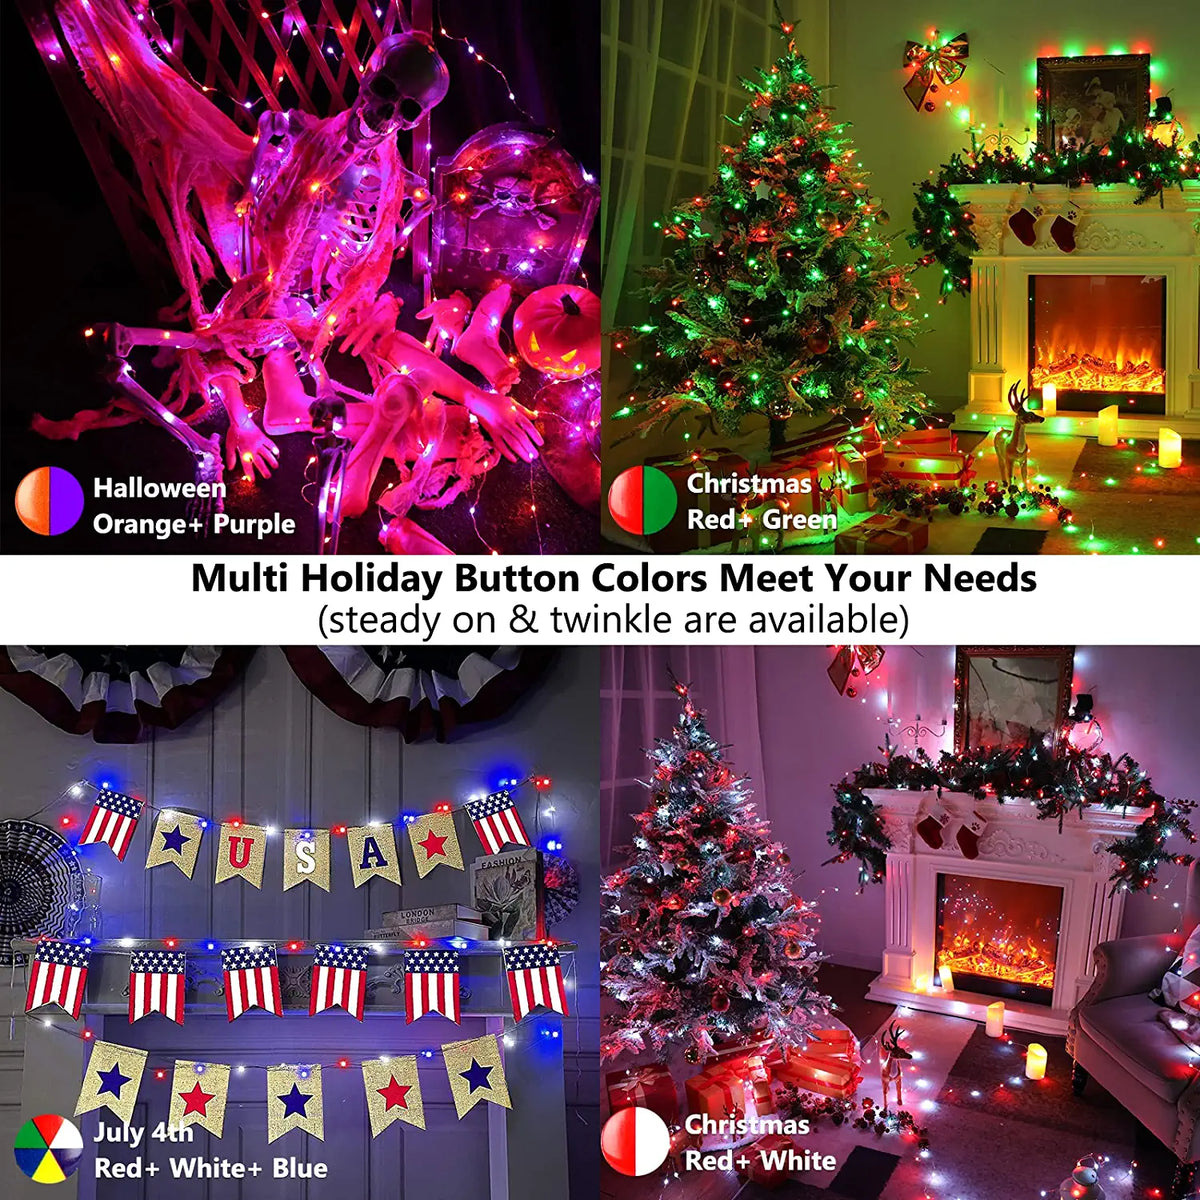 BrizLabs 33ft 100 LED USB Powered RGB  Fairy Lights with 44 Keys Remote